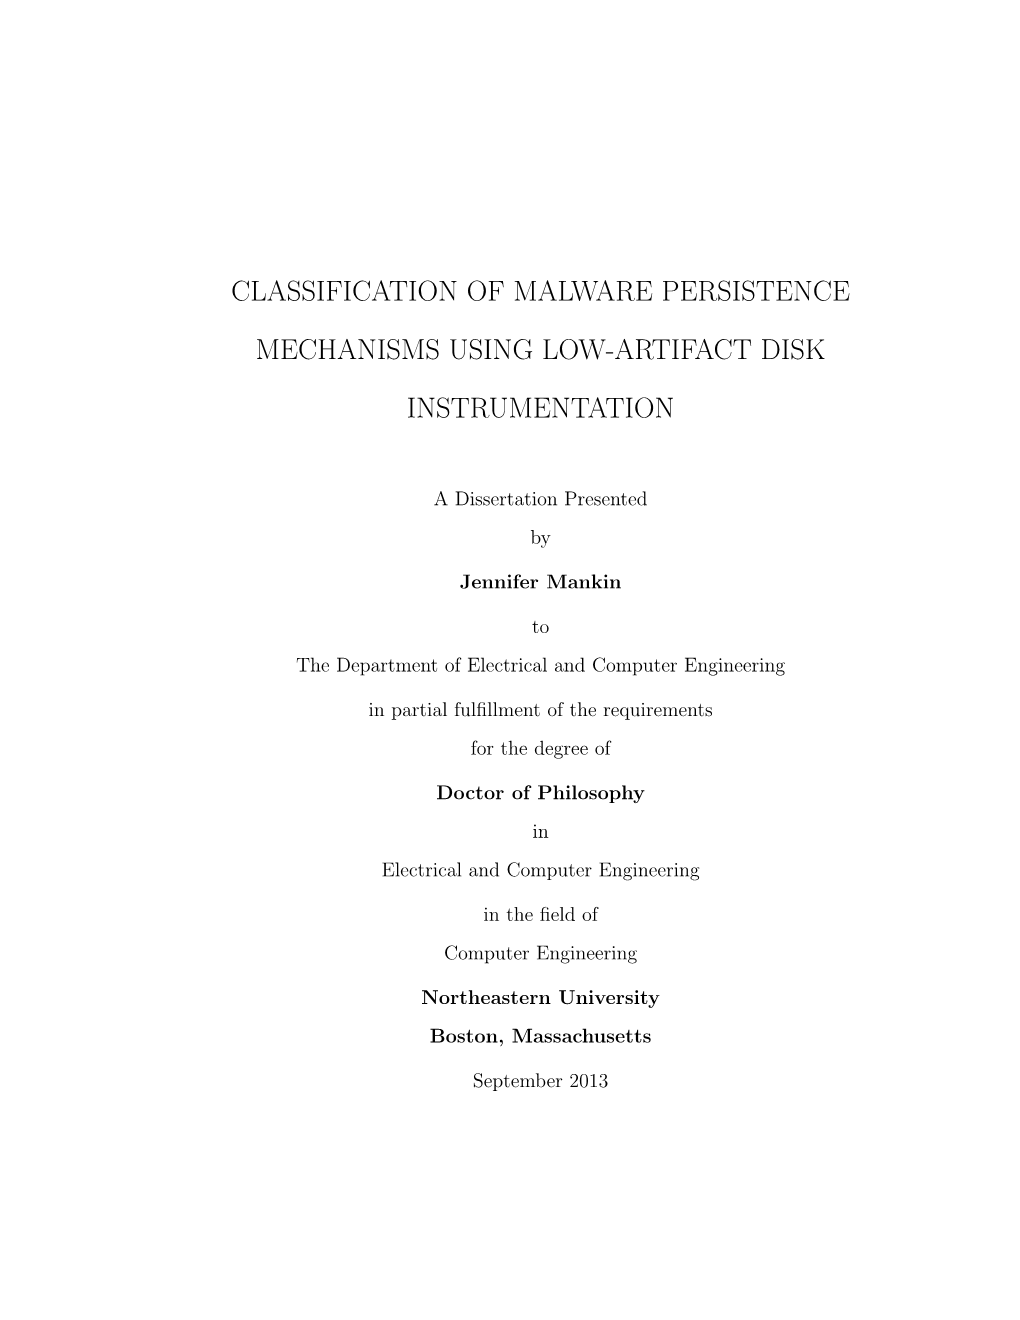 Classification of Malware Persistence Mechanisms Using Low-Artifact Disk